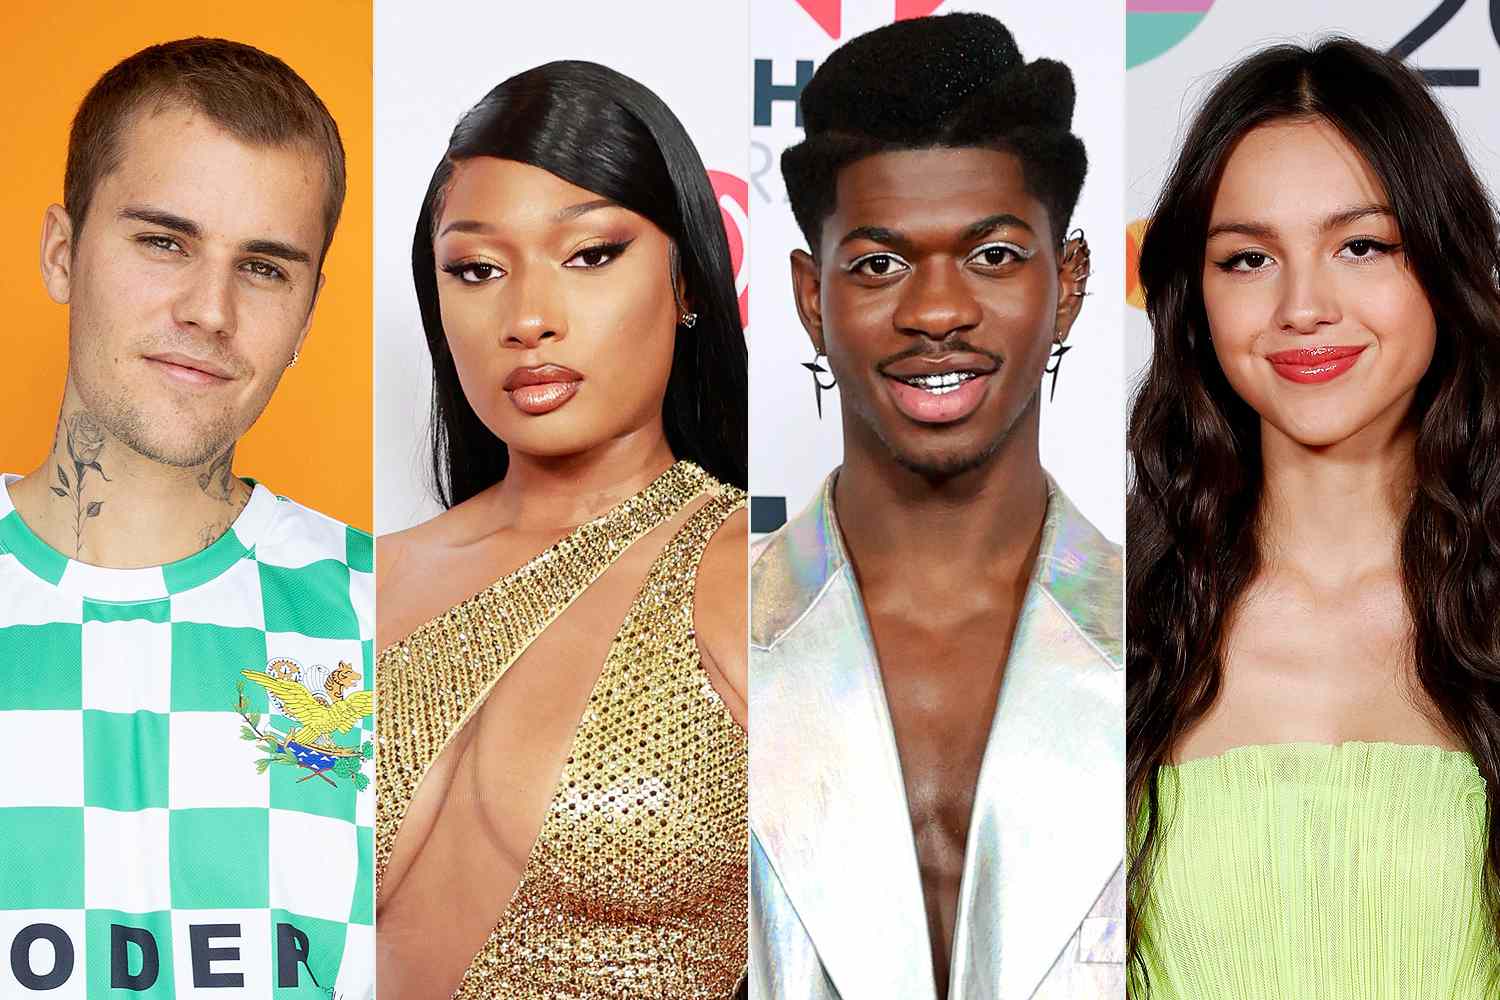 MTV Opens Voting For the 2021 VMAs: Here’s the Full Nominees List 1 MUGIBSON